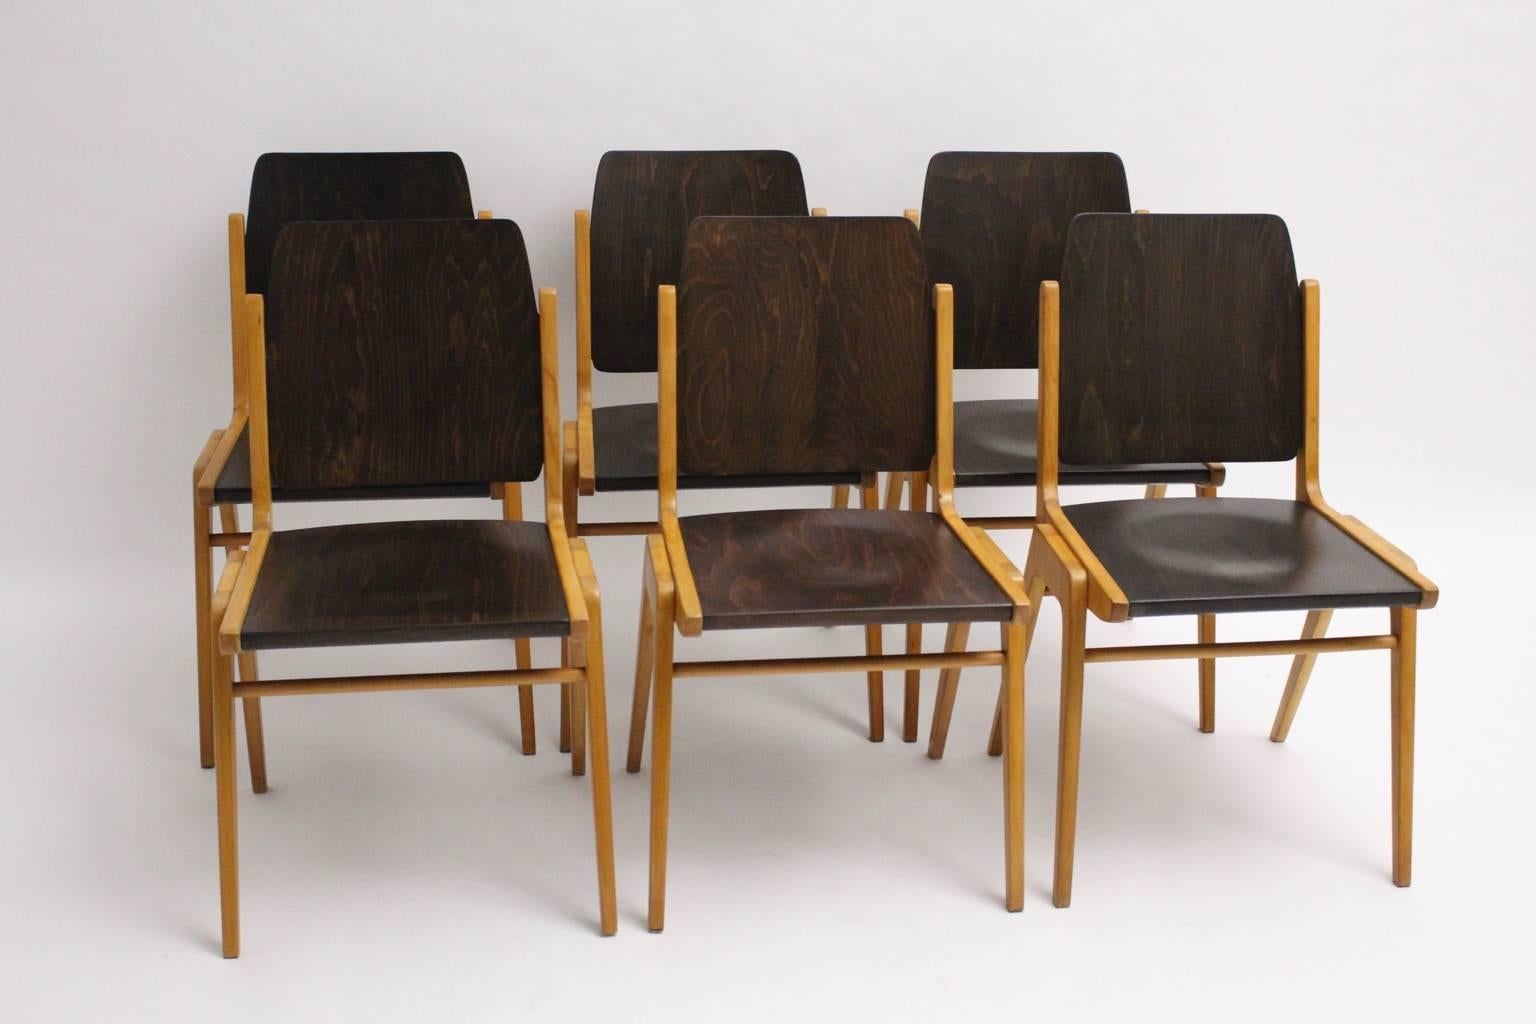 Mid Century Modern stackable bicolored dining room chairs or chairs designed by Franz Schuster (1892-192) for the Forum Stadtpark Graz 1959, model Austro Chairs, and executed by Wiesner, Hager Austria.
Franz Schuster was a famed Viennese designer